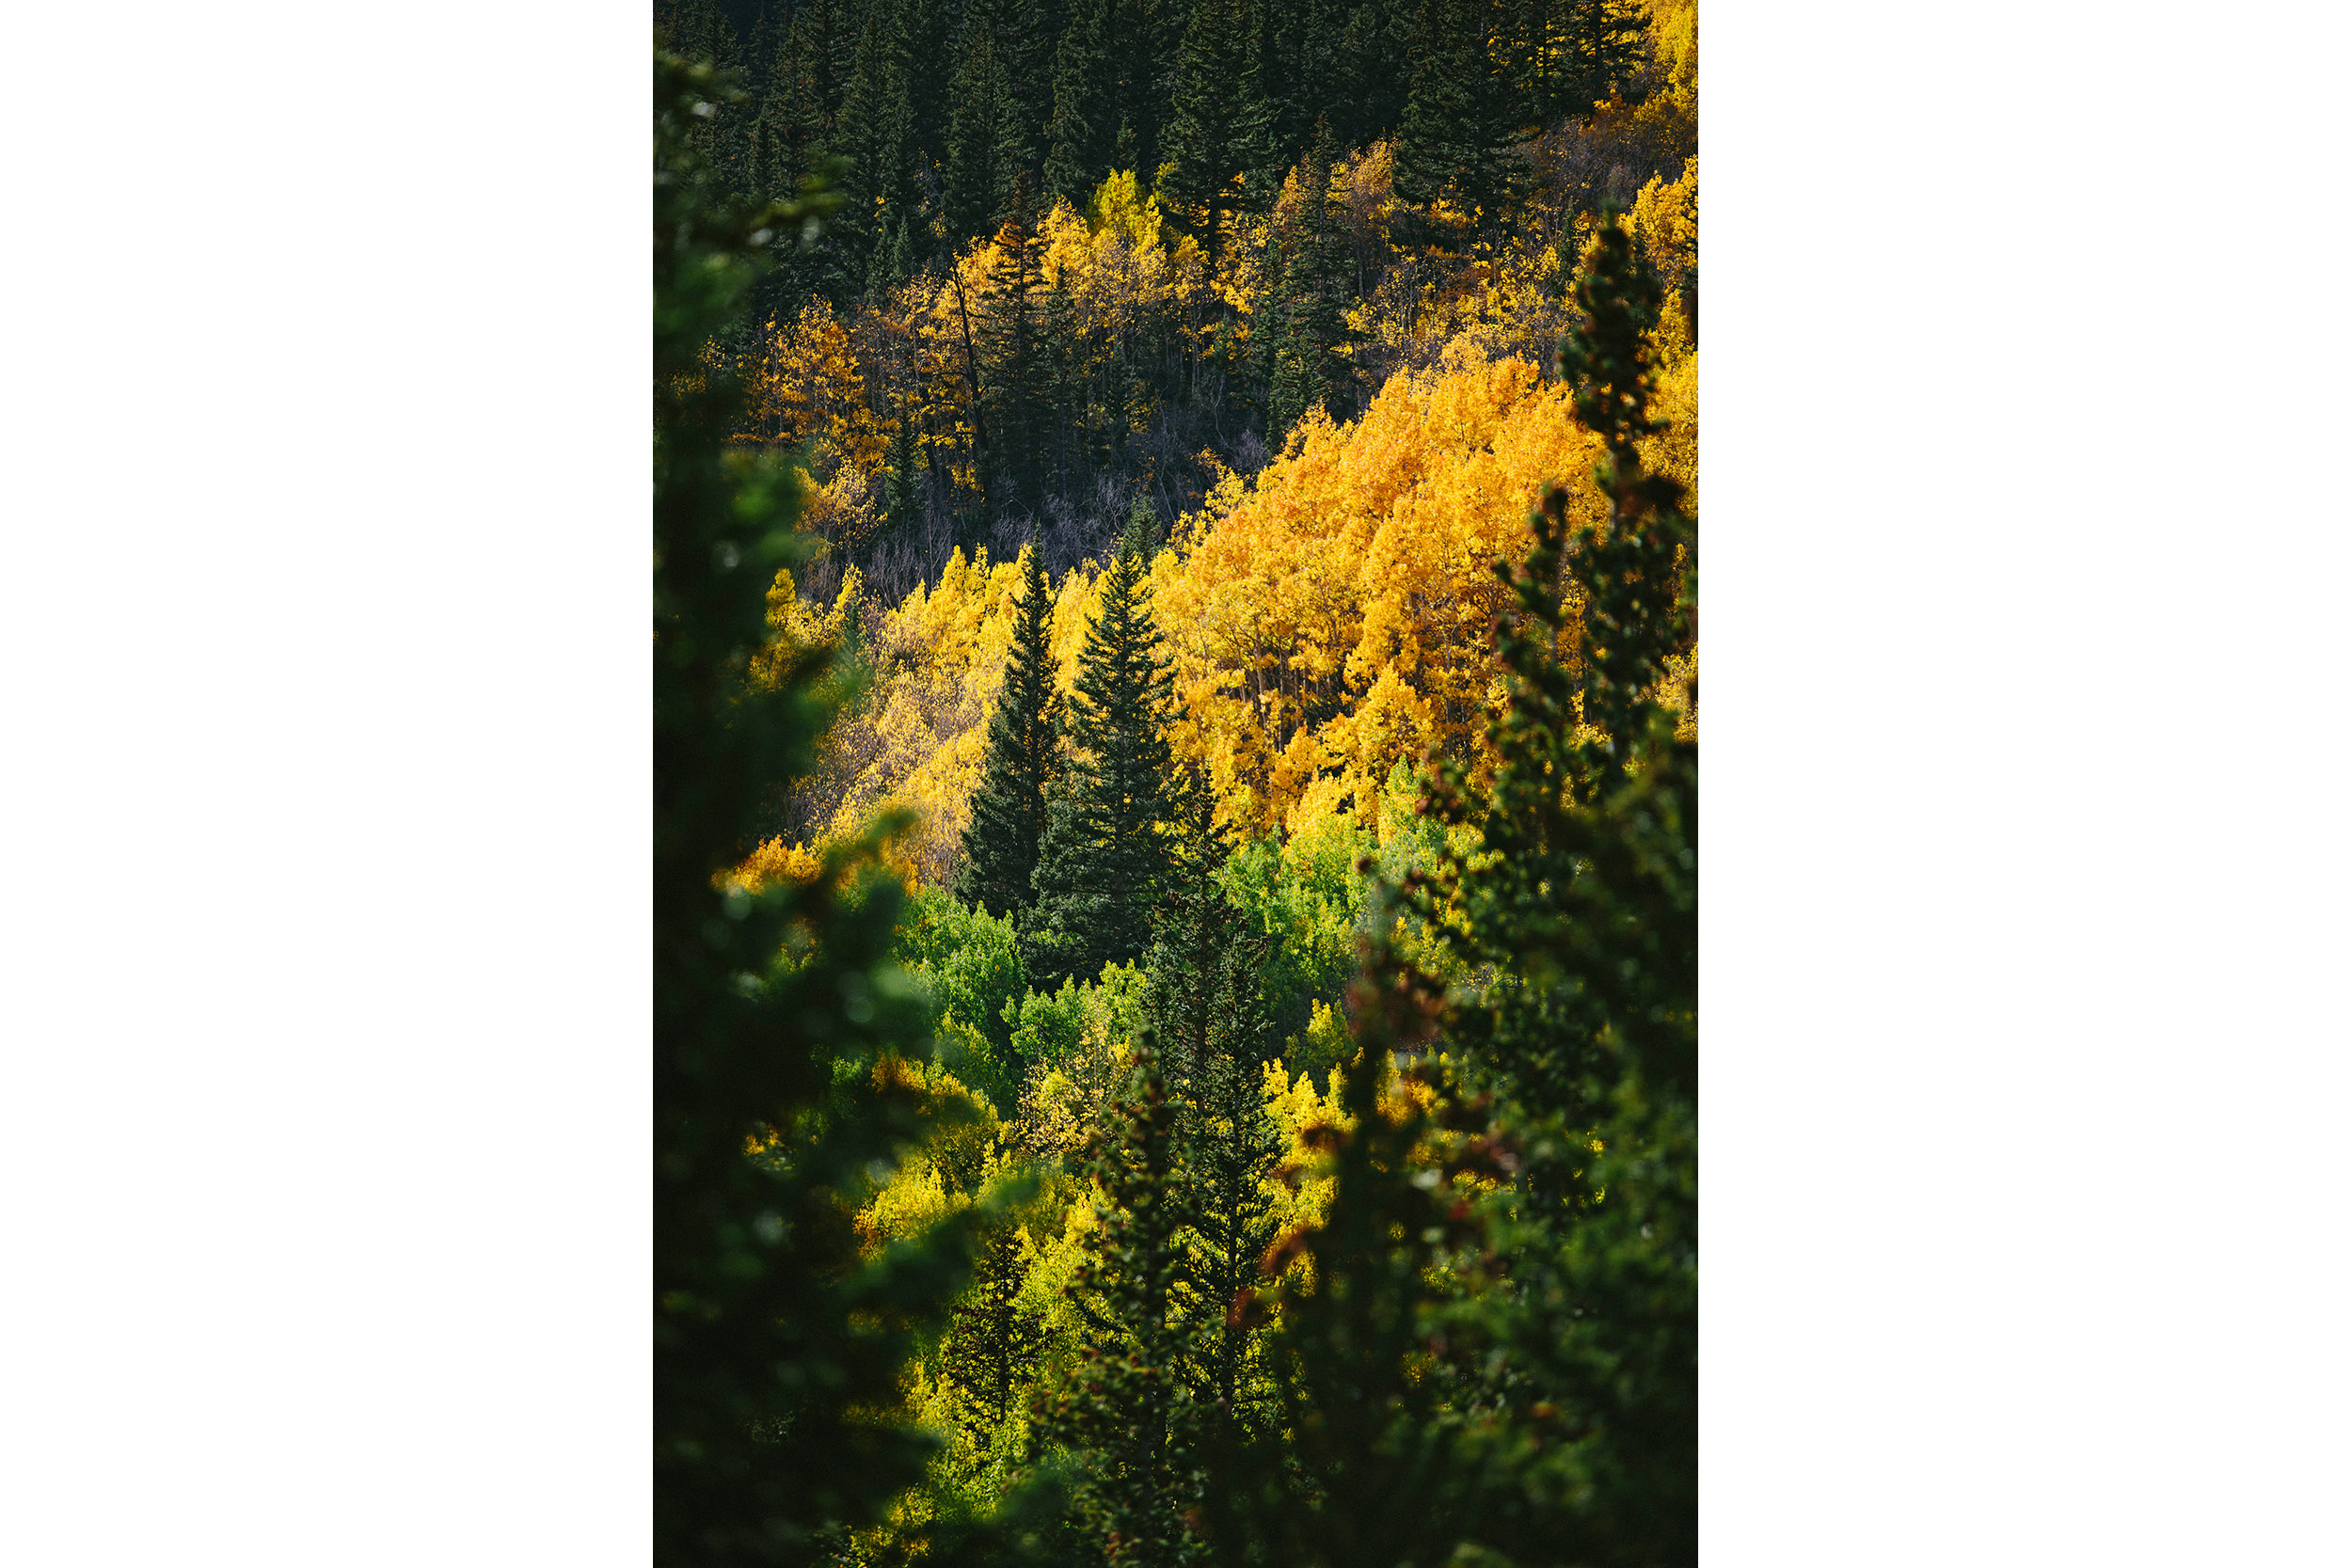 Colorado aspens paint the hillside with their brilliant yellows